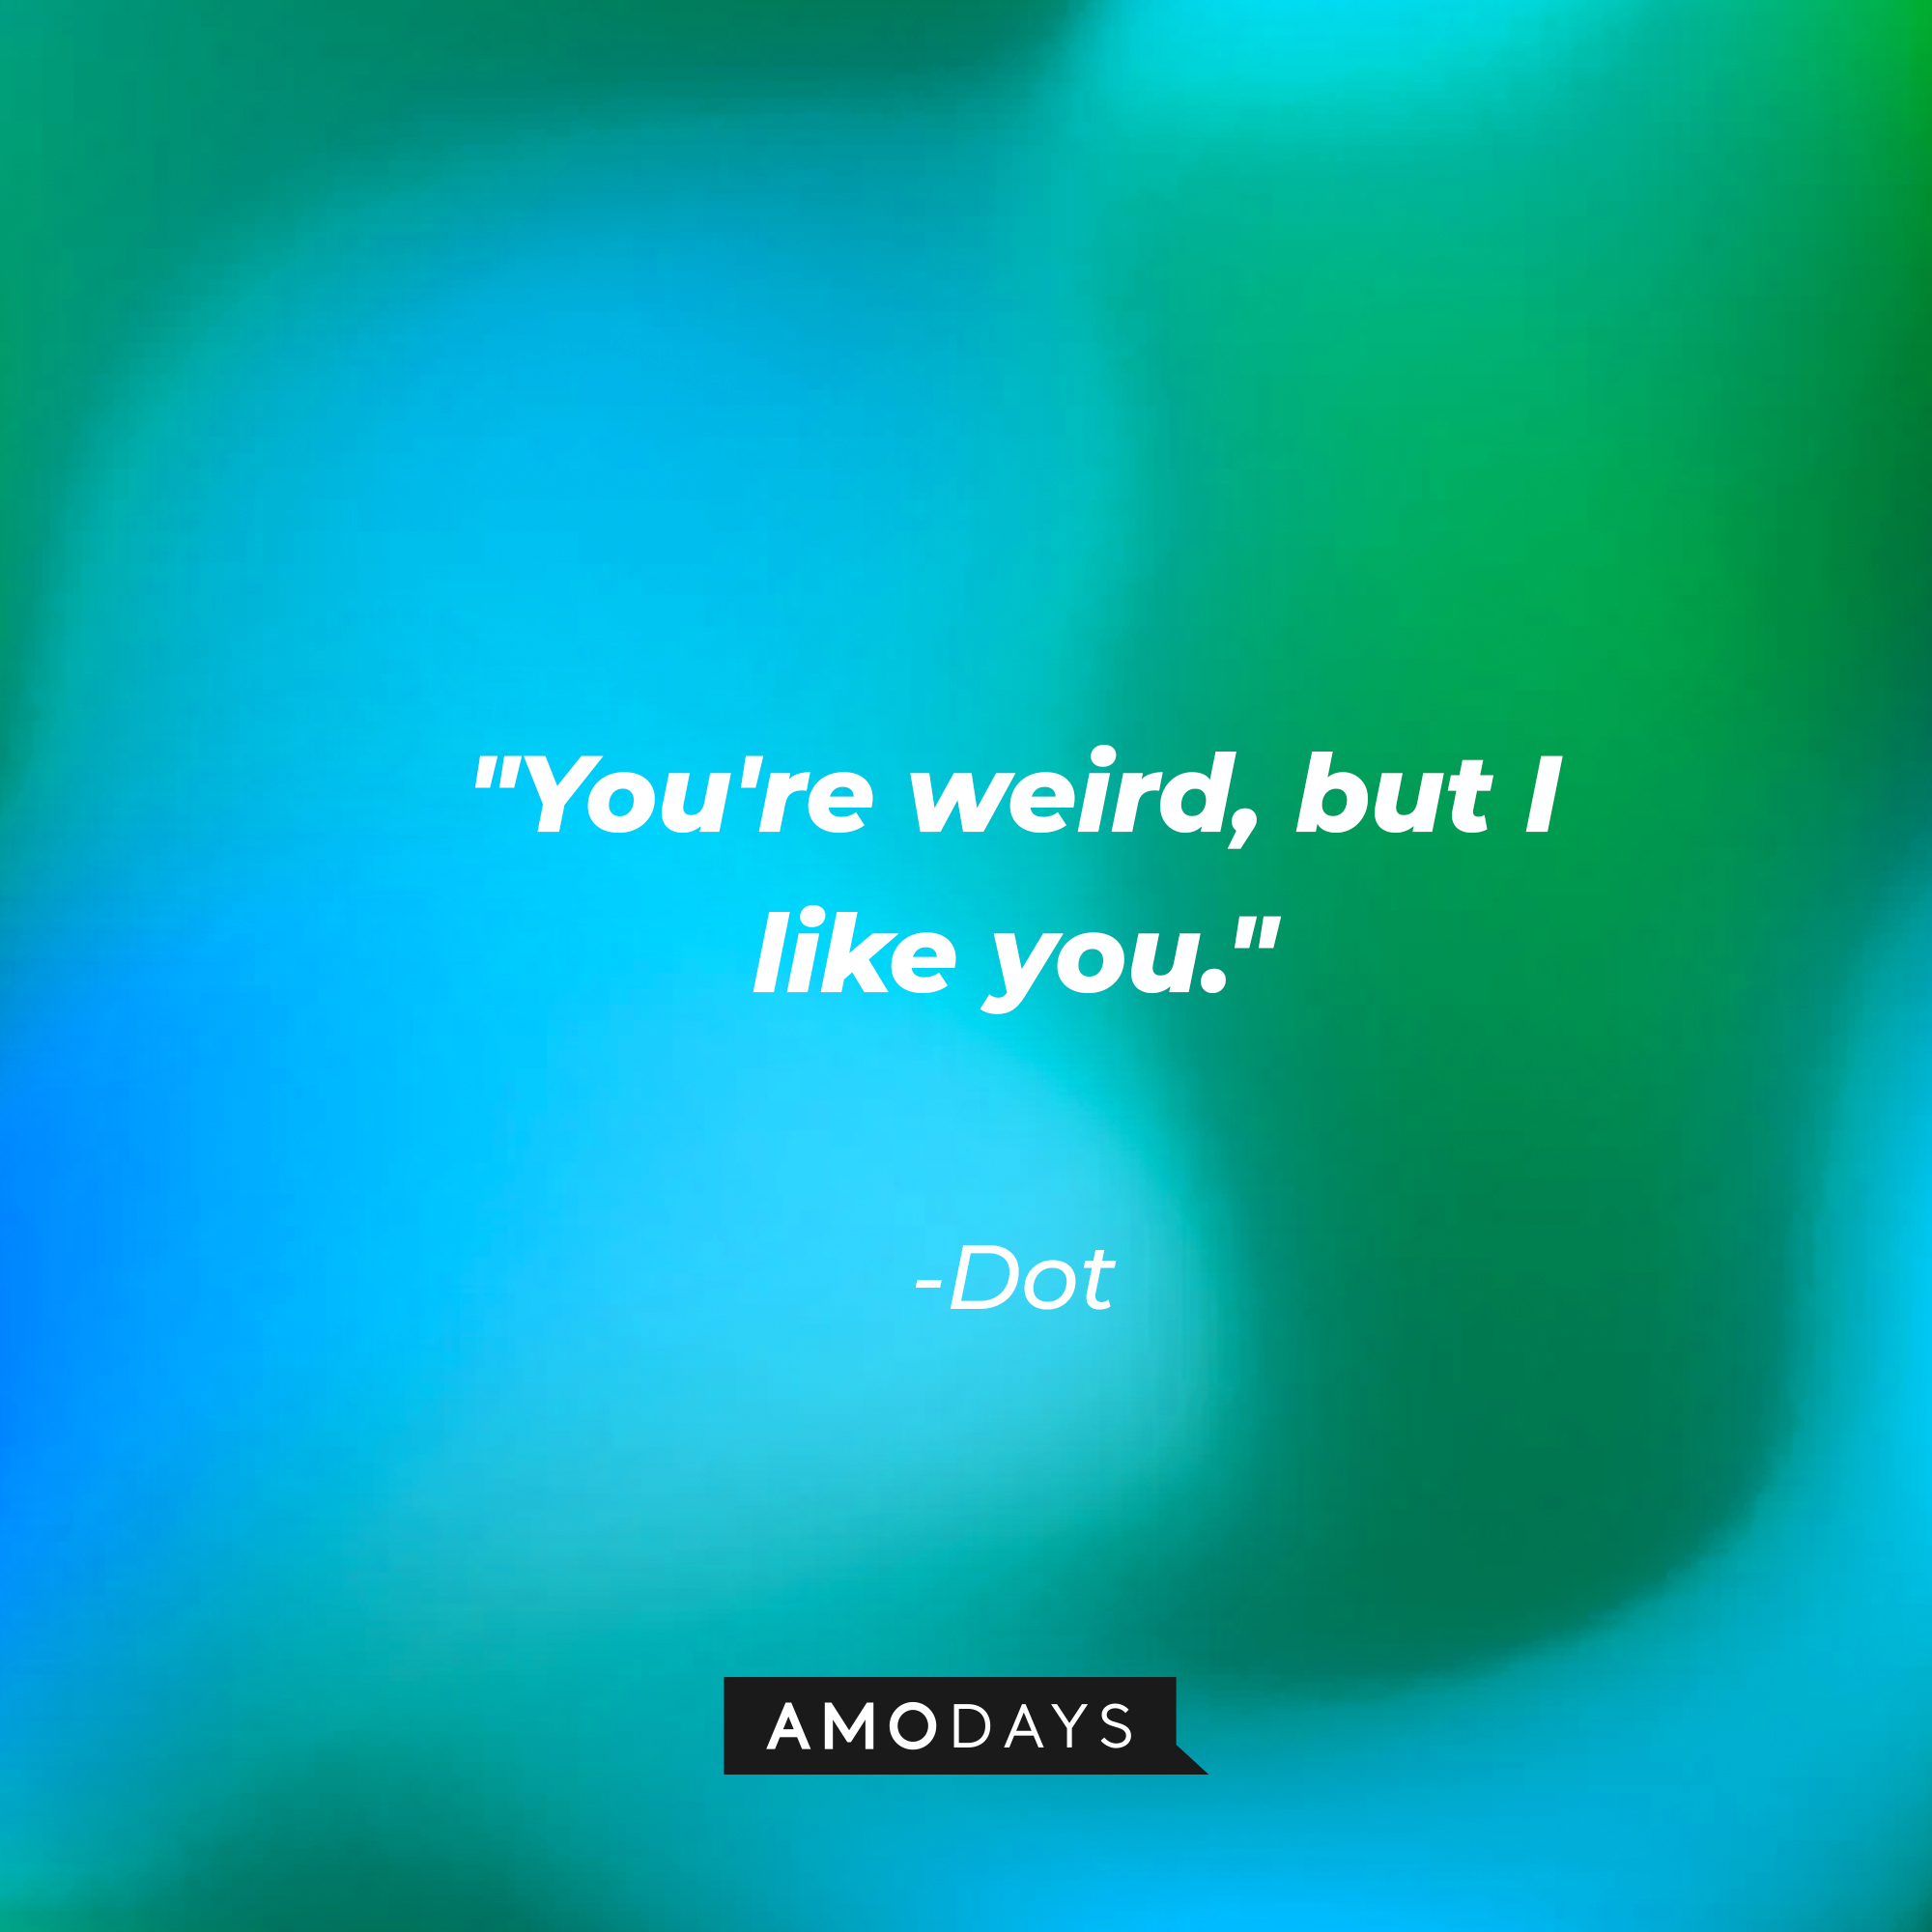 Dot's quote: "You're weird, but I like you." | Source: AmoDays